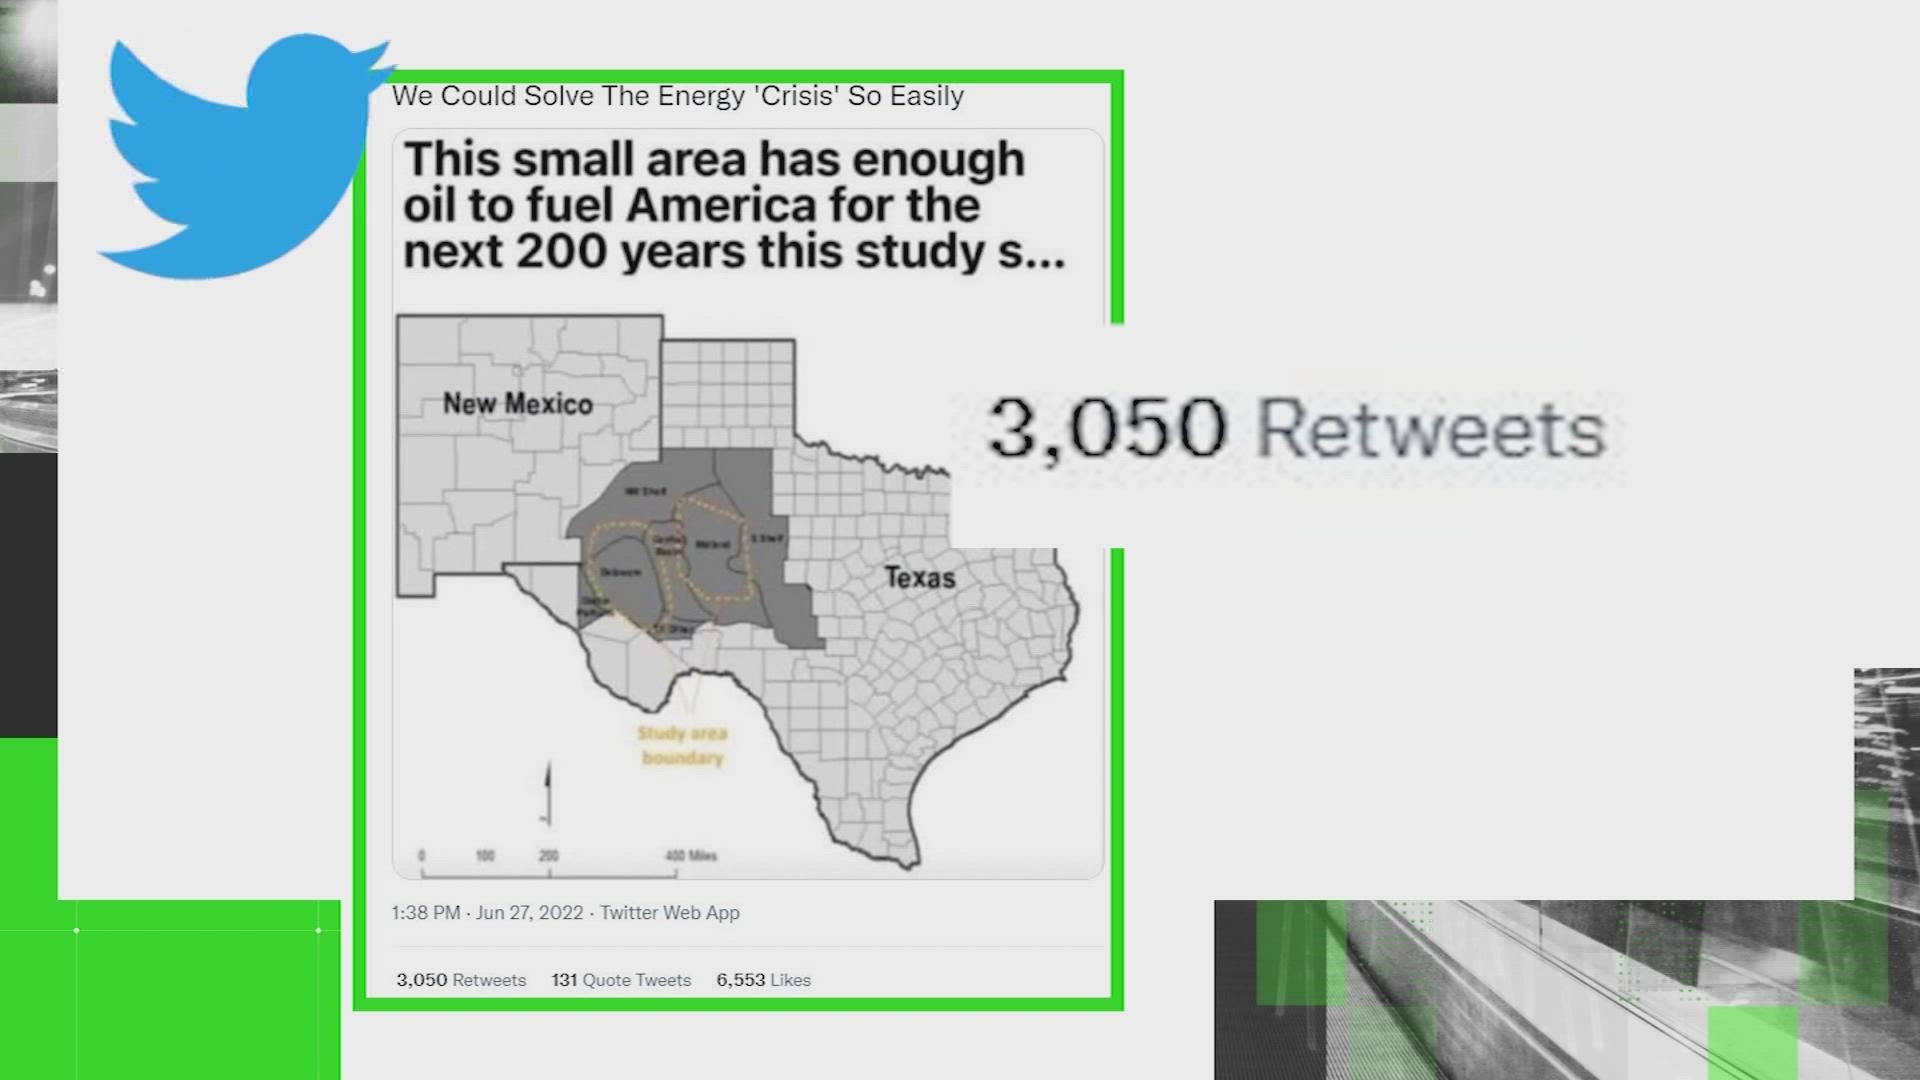 There is enough oil in Texas and New Mexico to fuel the U.S. for 200 years, but it's not easily accessible.